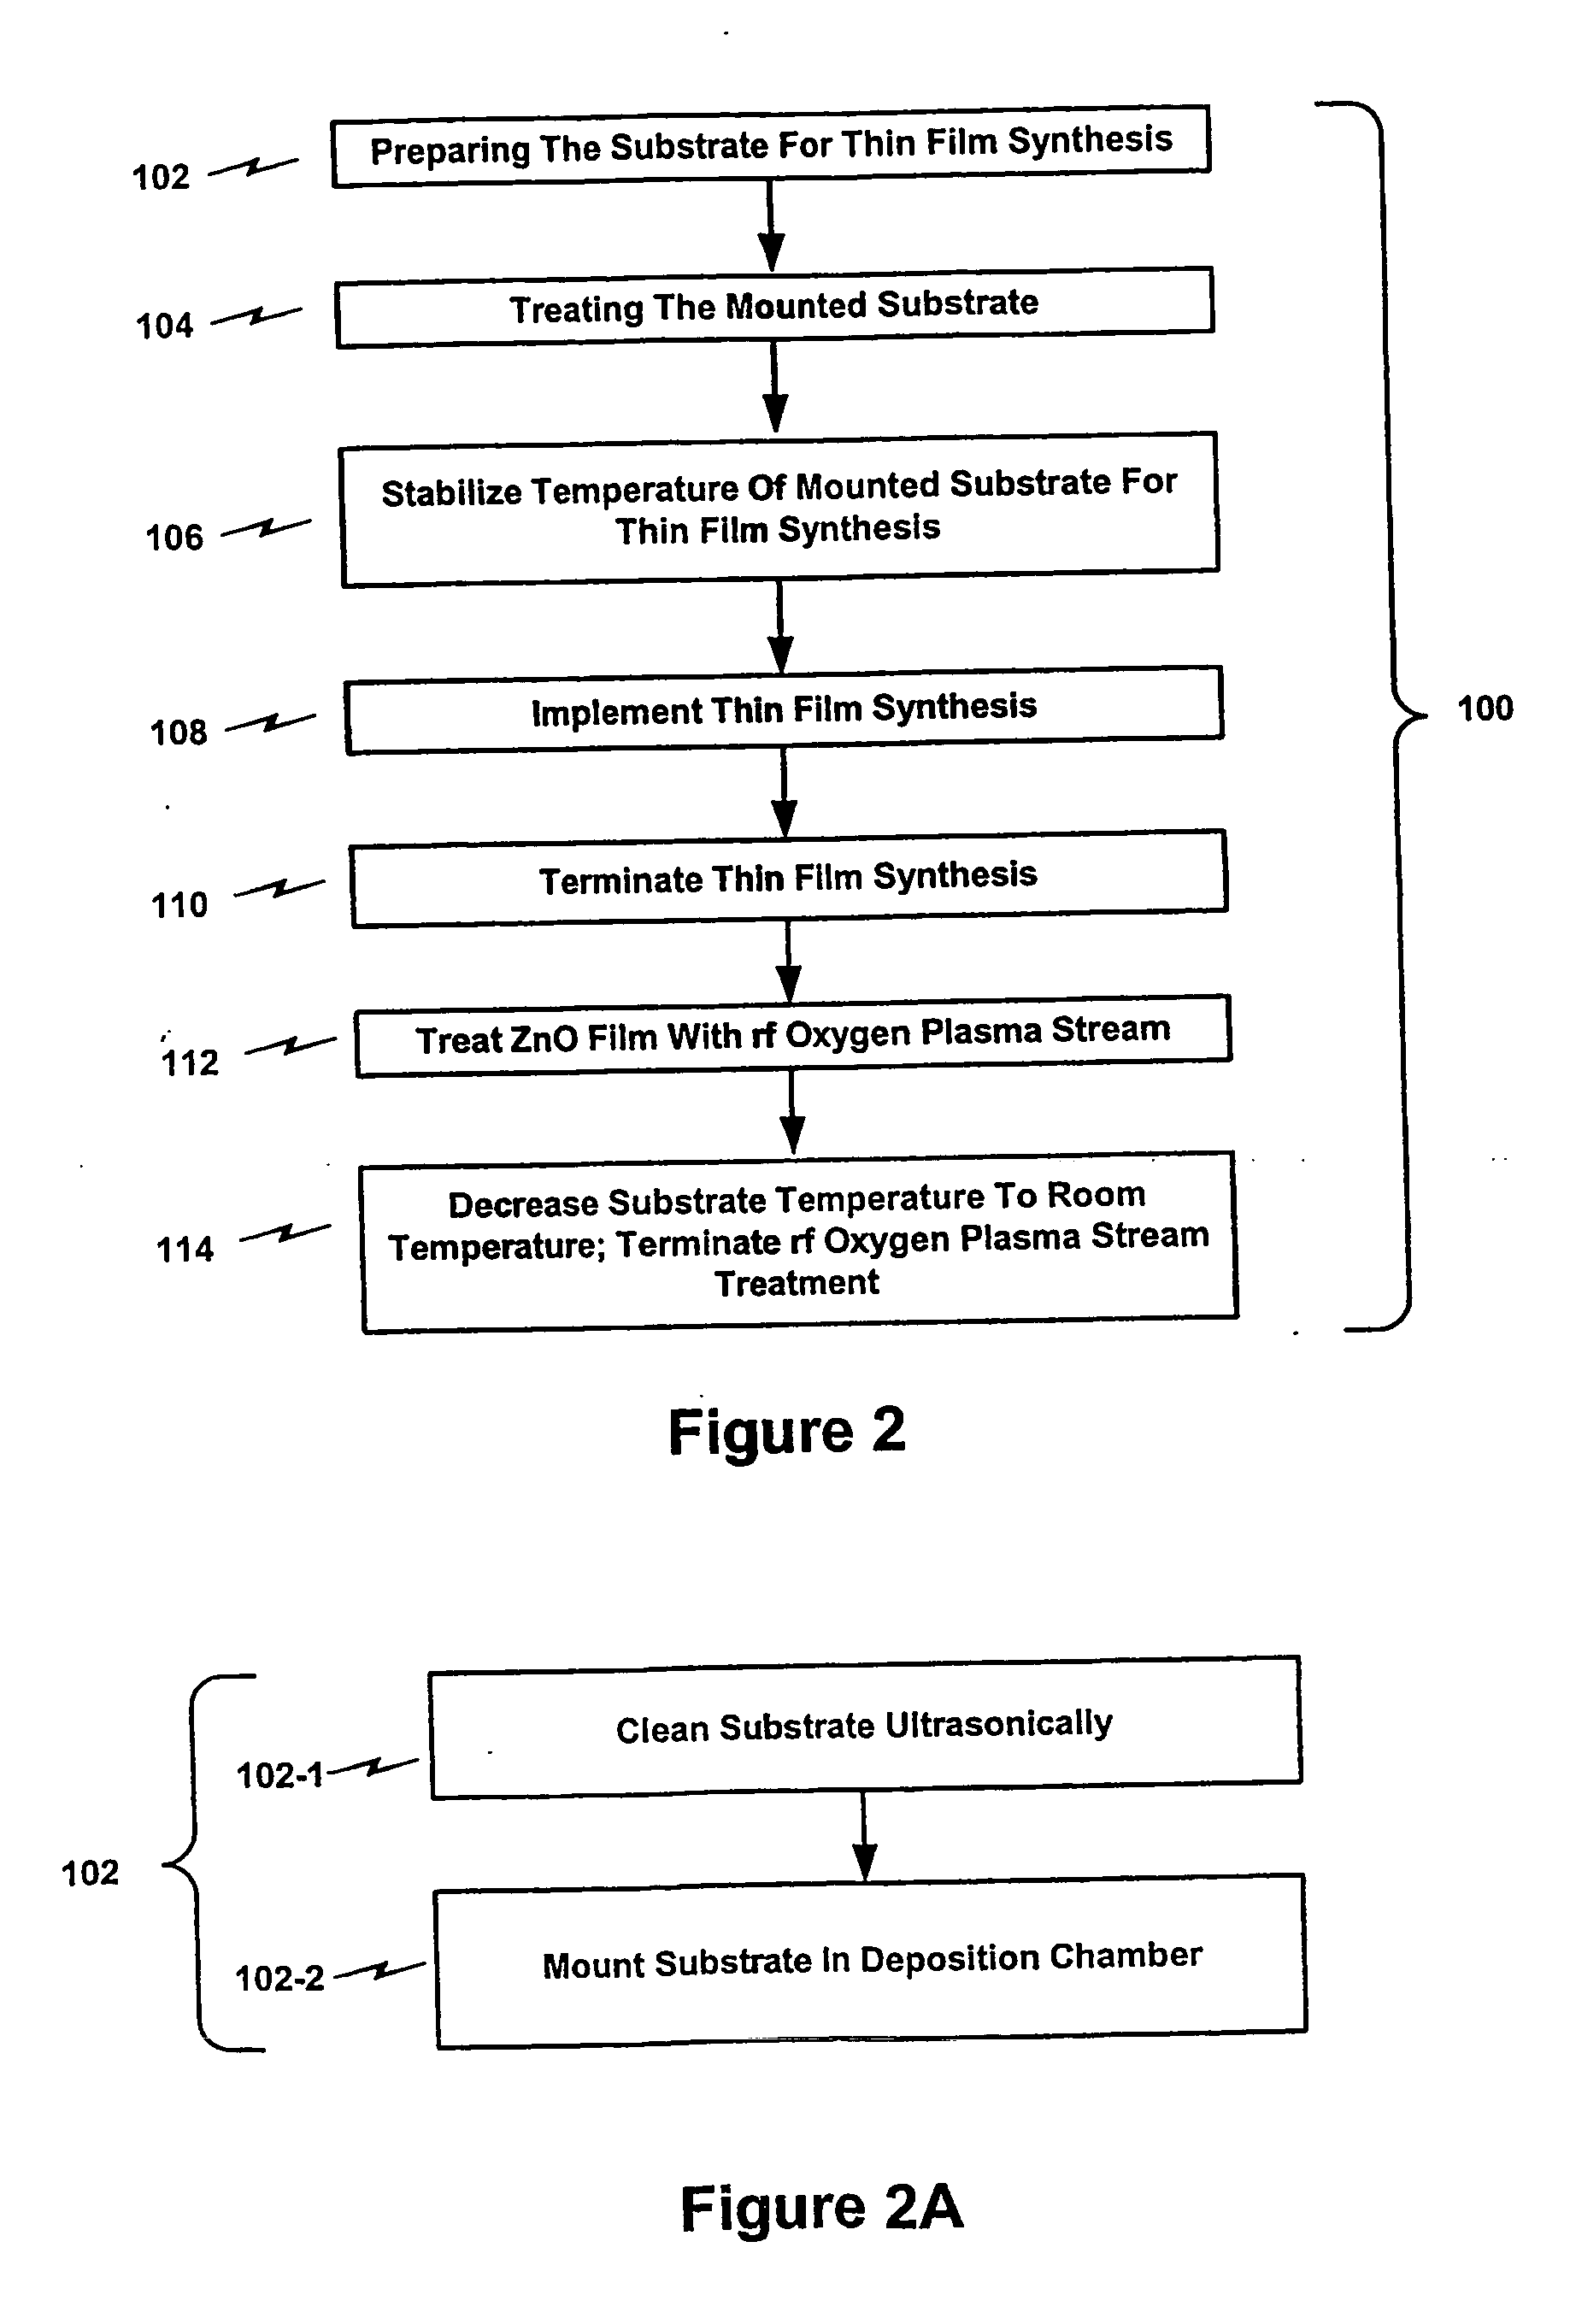 Hybrid beam deposition system and methods for fabricating metal oxide-zno films, p-type zno films, and zno-based II-VI compound semiconductor devices